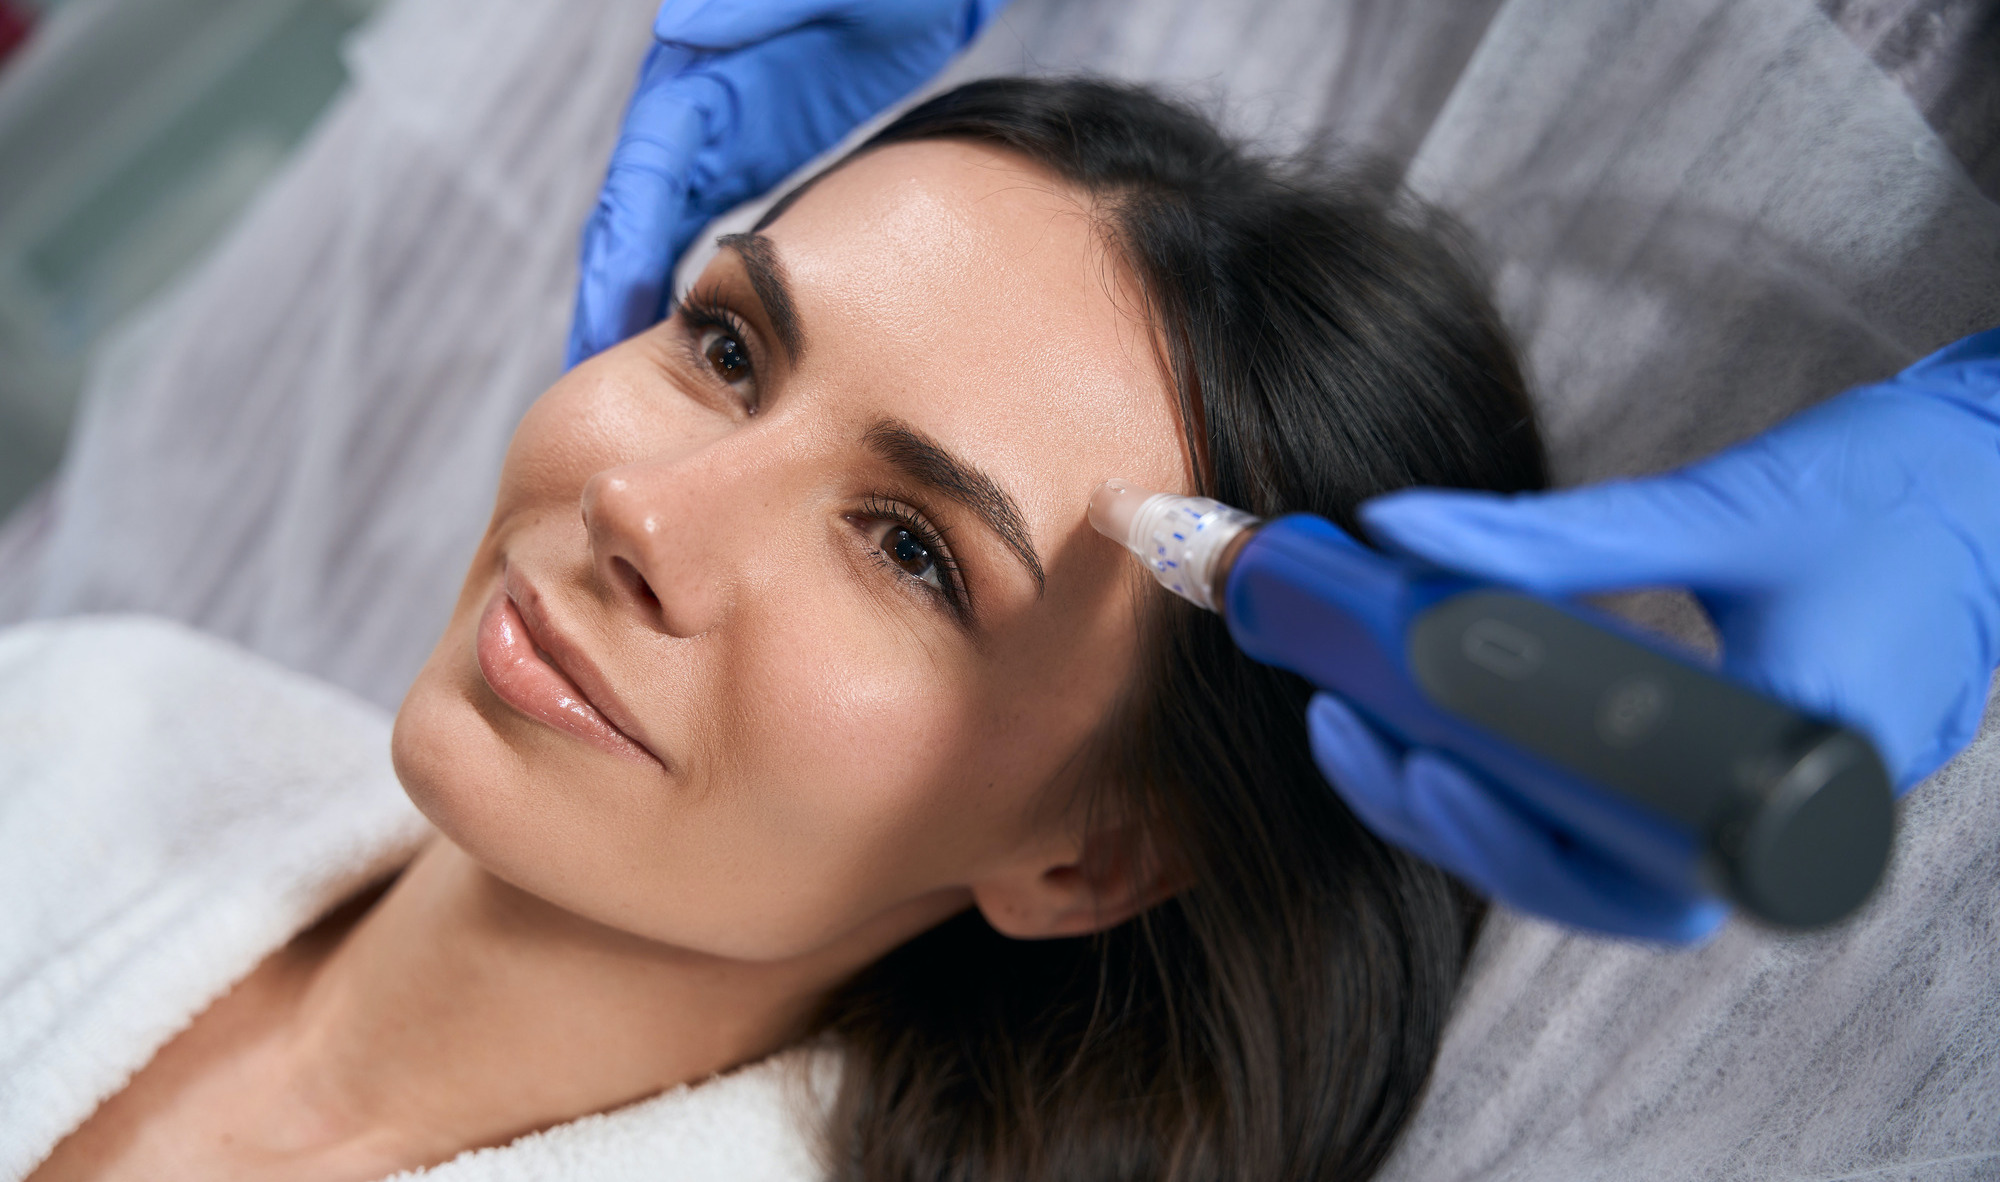 Why You Should Book Microneedling Instead of Using At-Home Devices